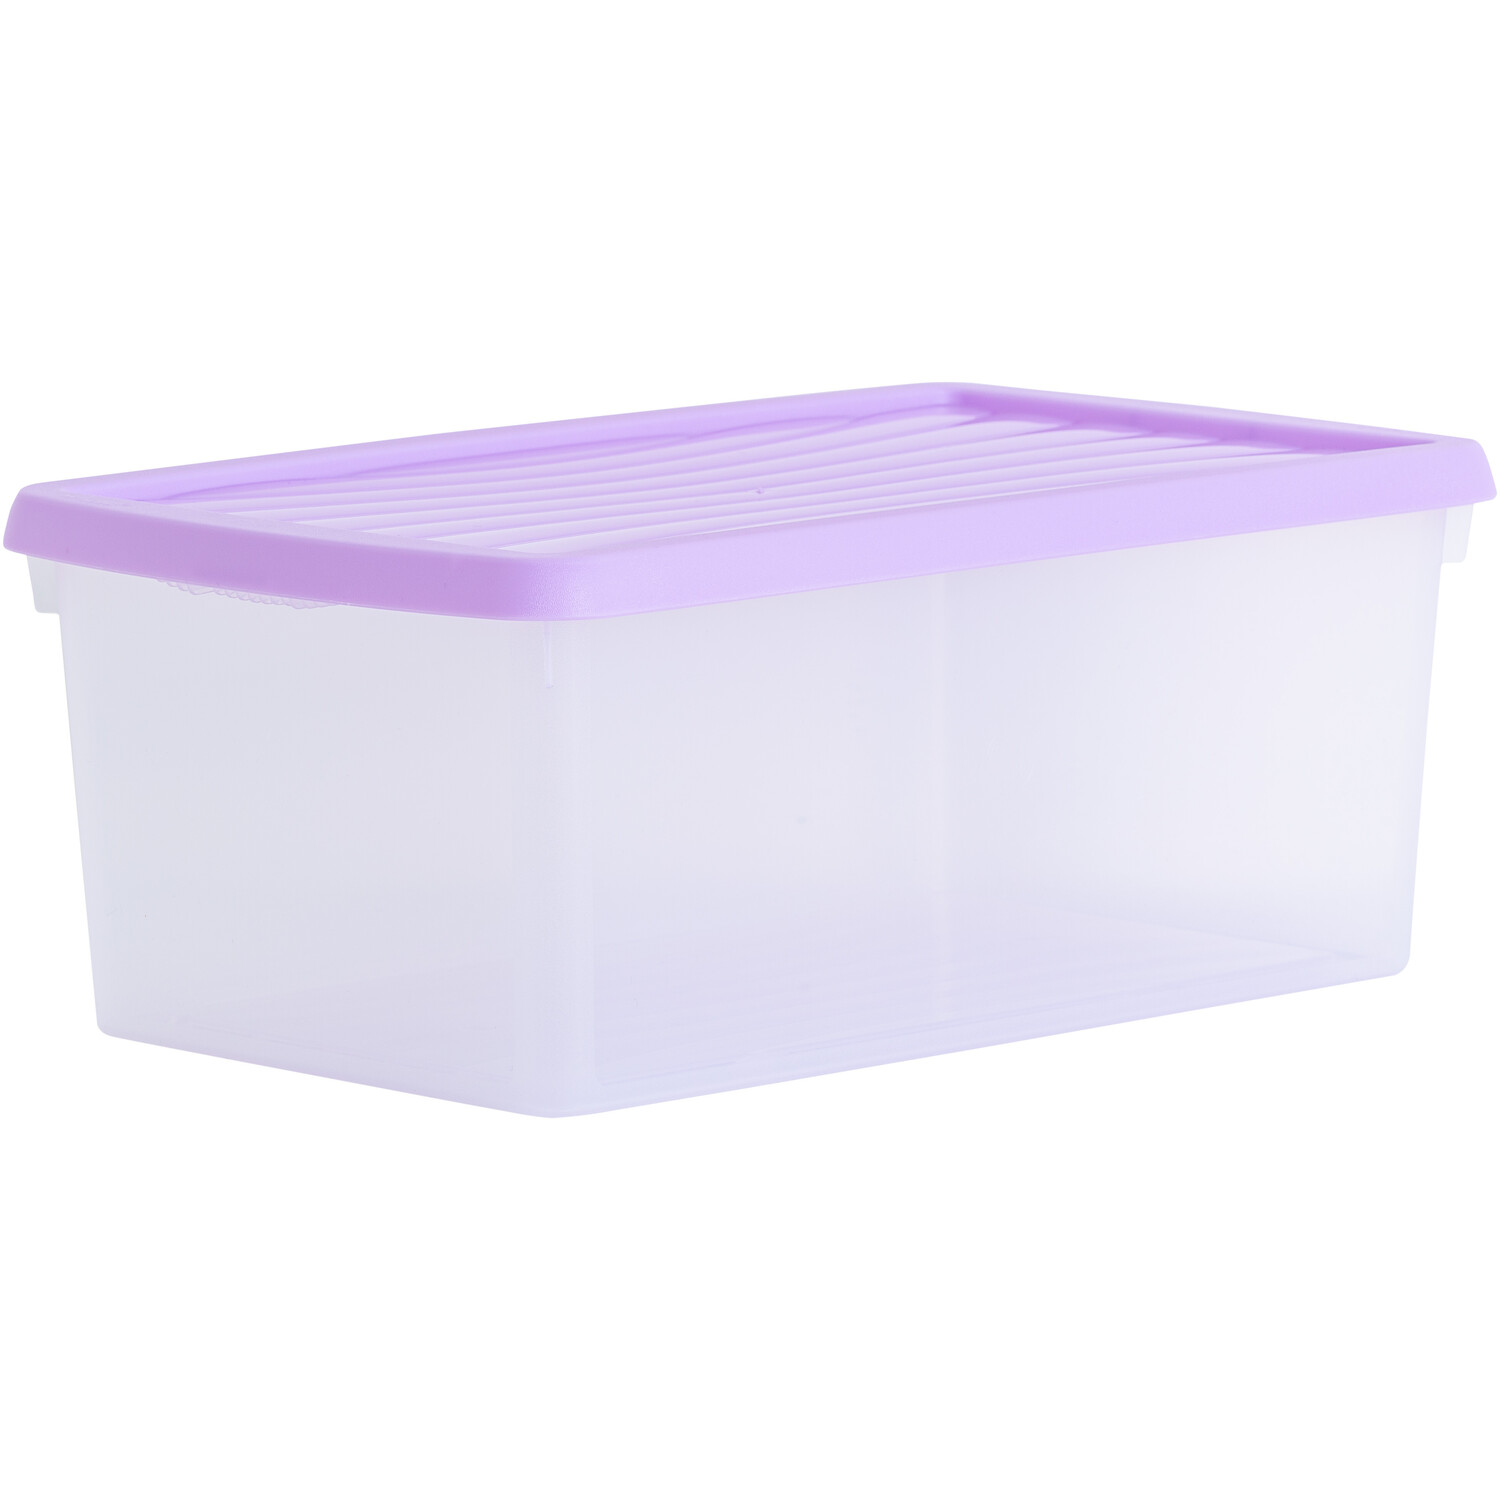 Single 9L Storage Box with Clip On Lid in Assorted styles Image 1